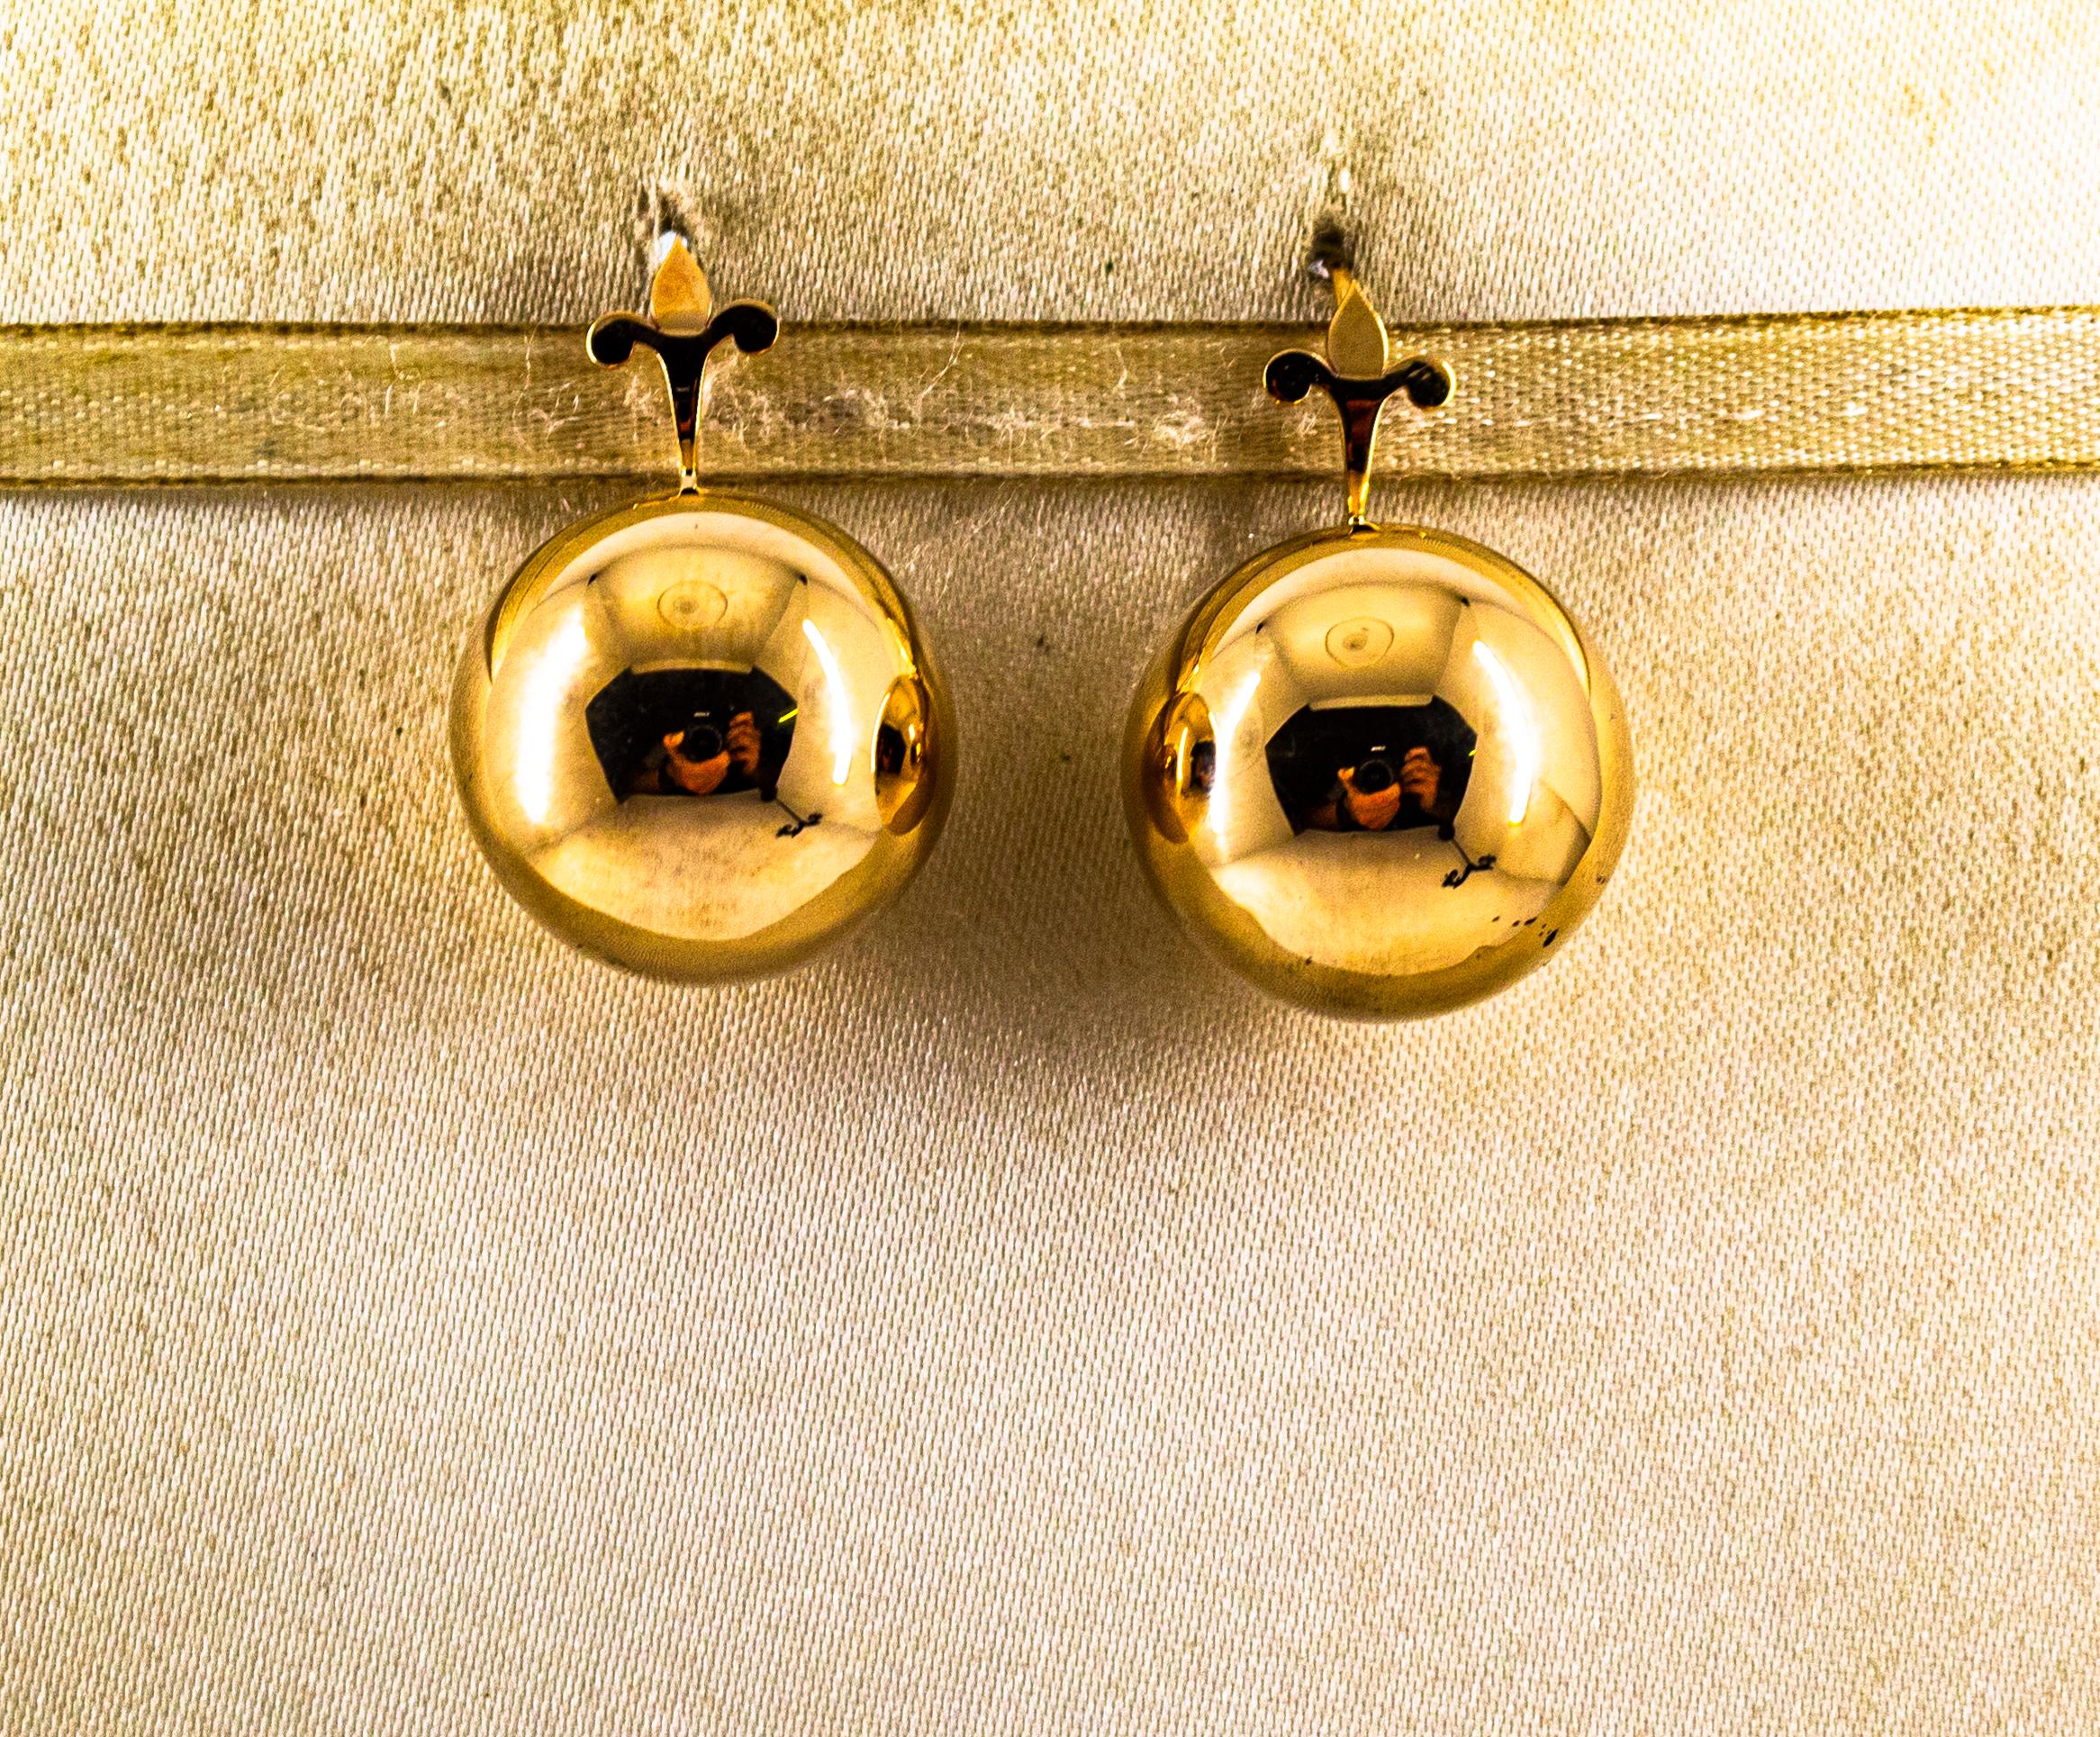 These Earrings are made of 9K Yellow Gold.
These Earrings are available also in 14K or 18K Yellow or White Gold.
These Earrings are inspired by Art Deco.

All our Earrings have pins for pierced ears but we can change the closure and make any of our